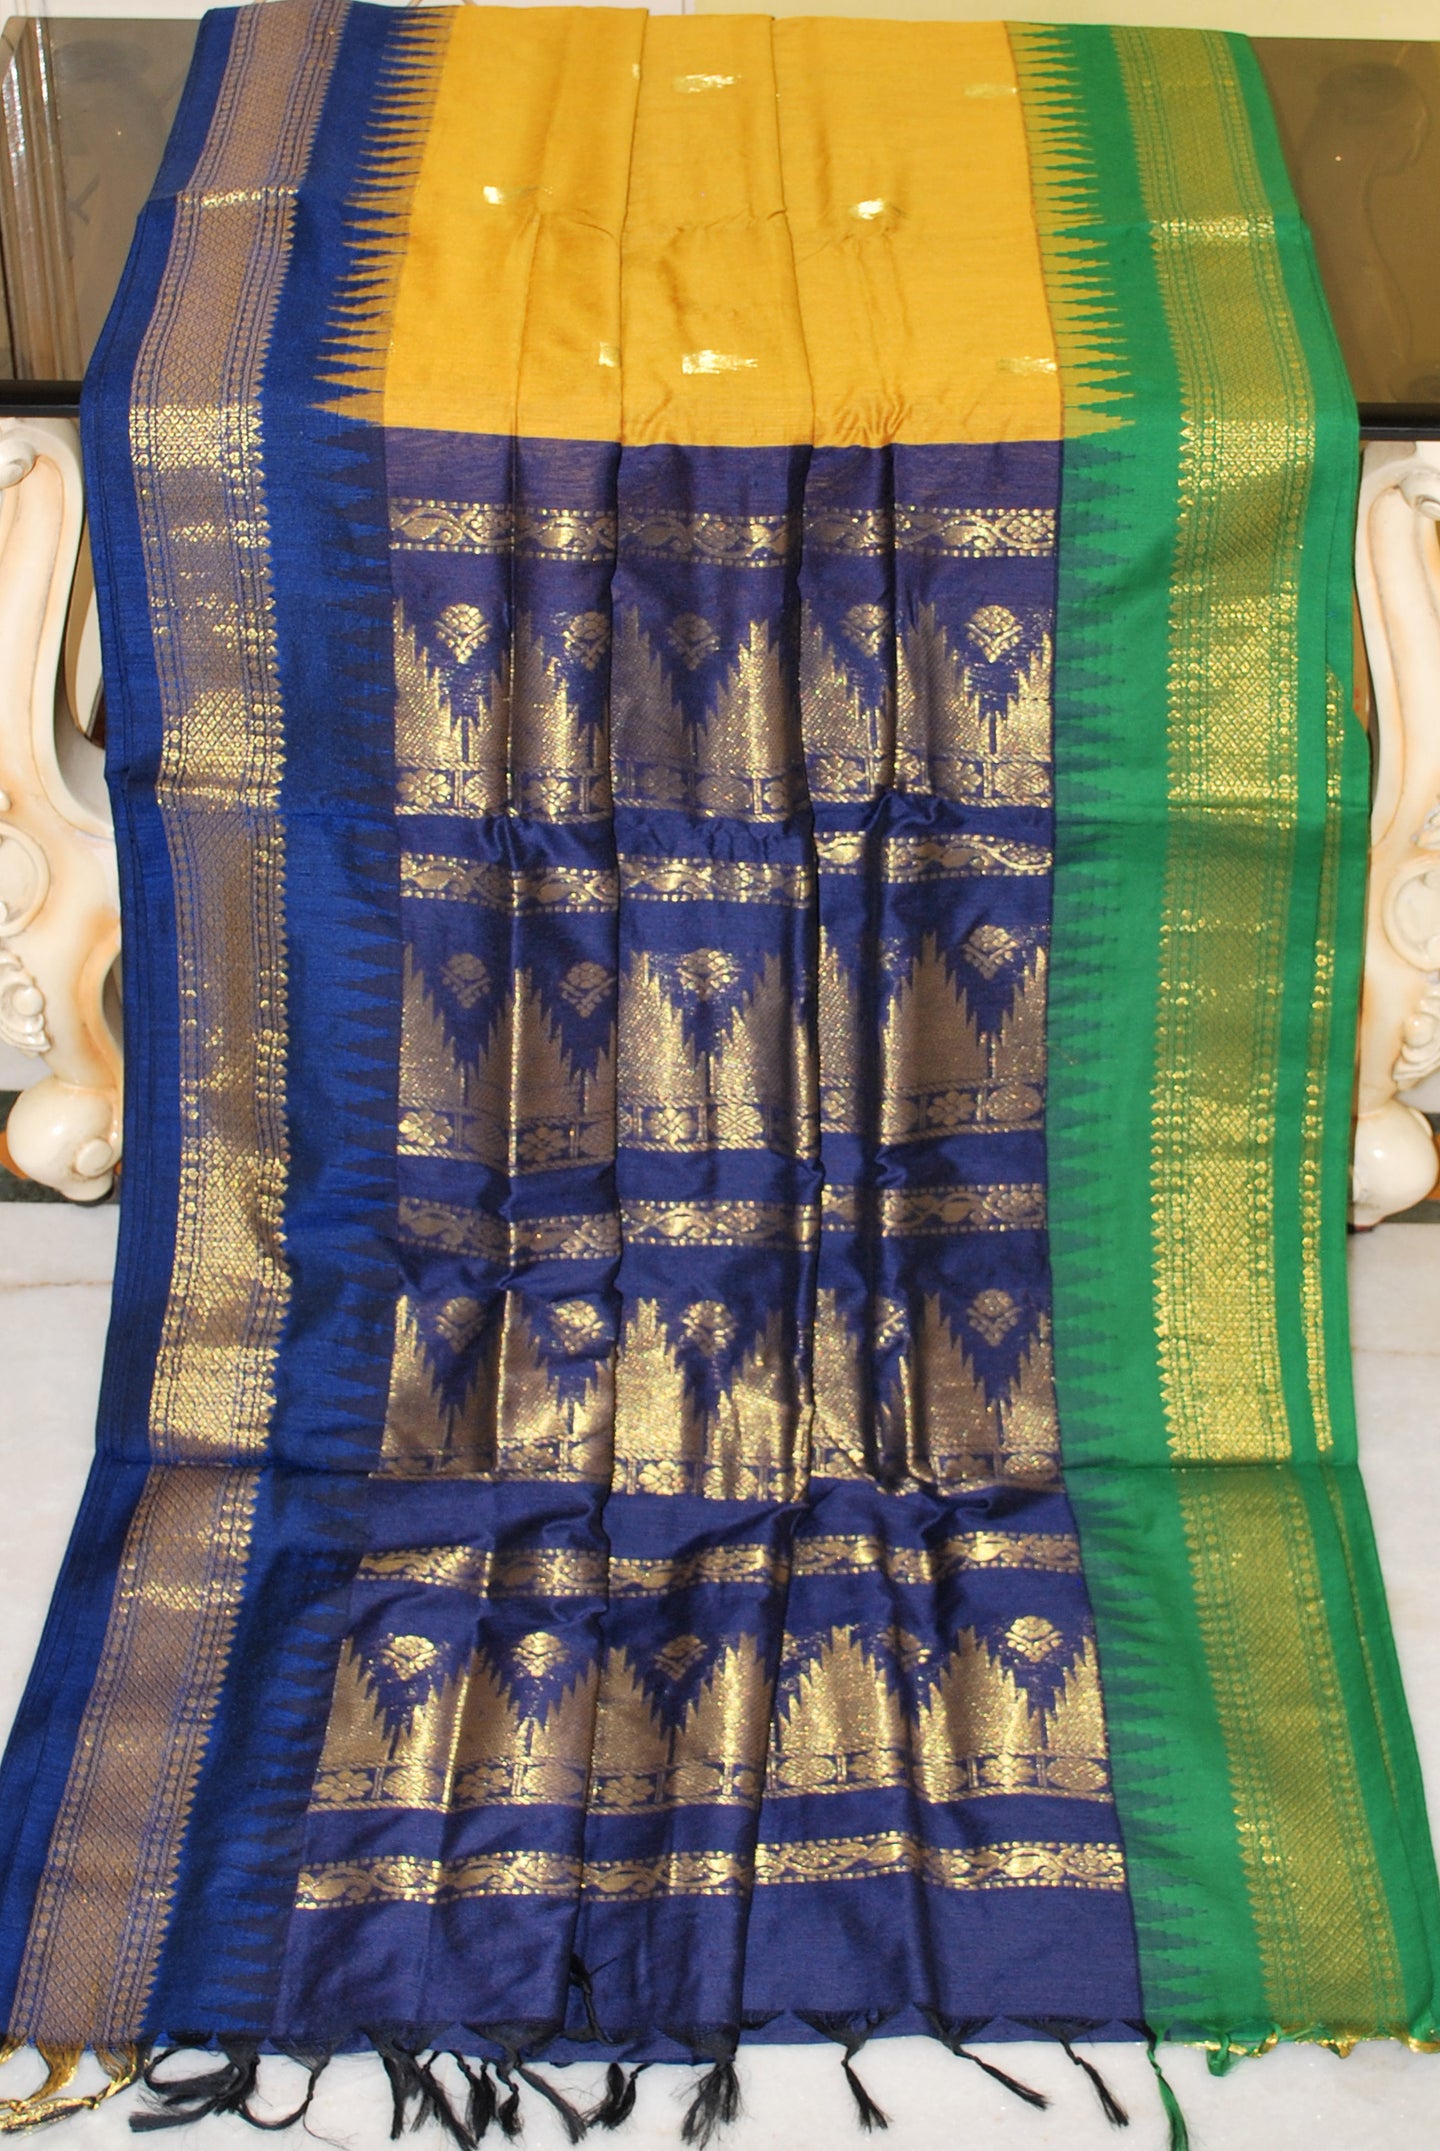 Crowned Temple Ganga Jamuna Border Cotton Gadwal Saree with Rich Pallu in Ochre Yellow, Navy Blue and Green